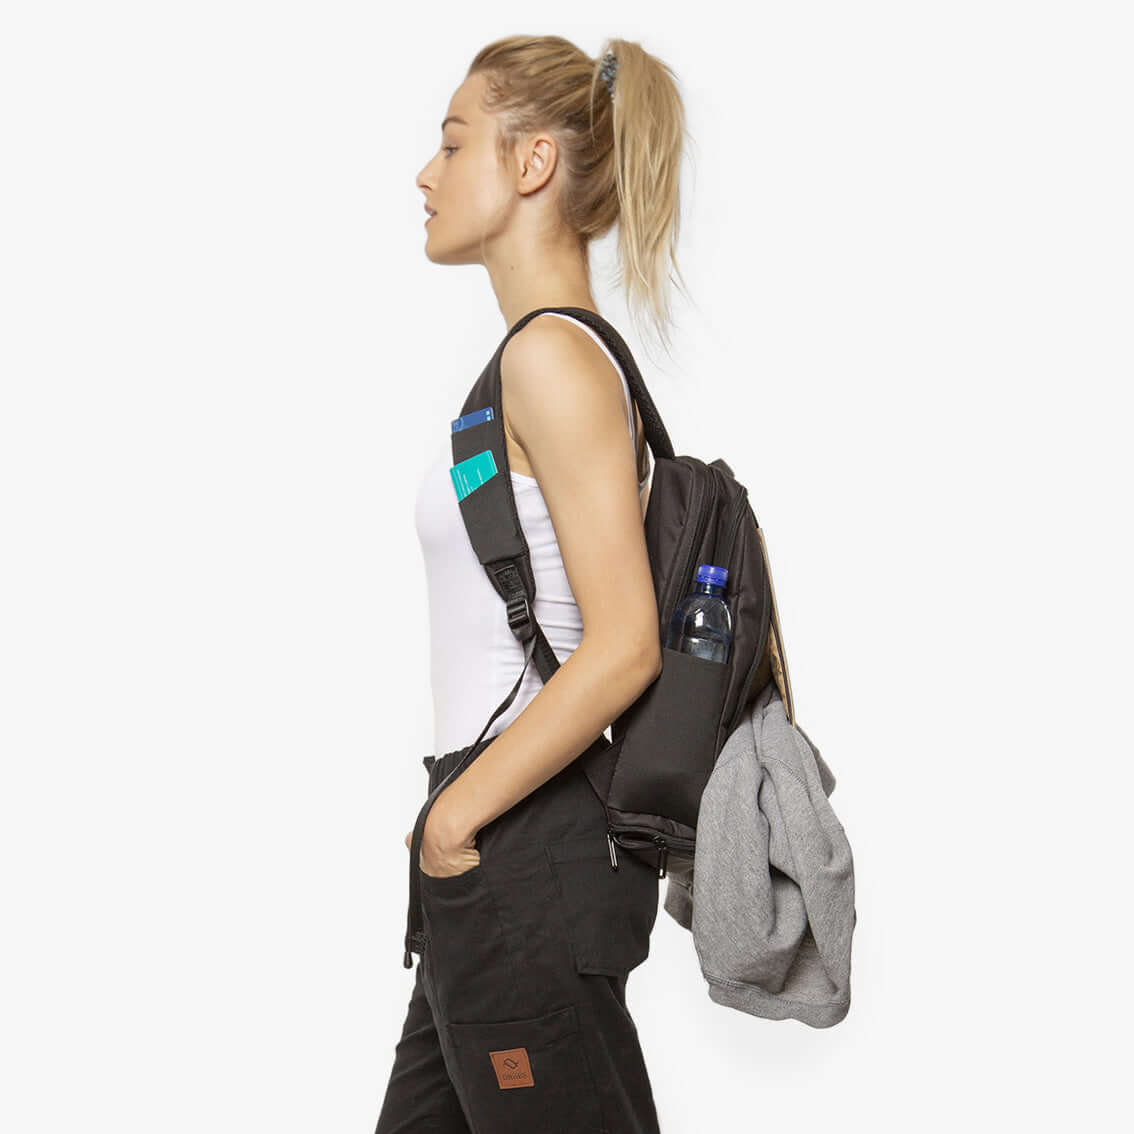 CITYC Laptop 2 in 1 Travel Backpack